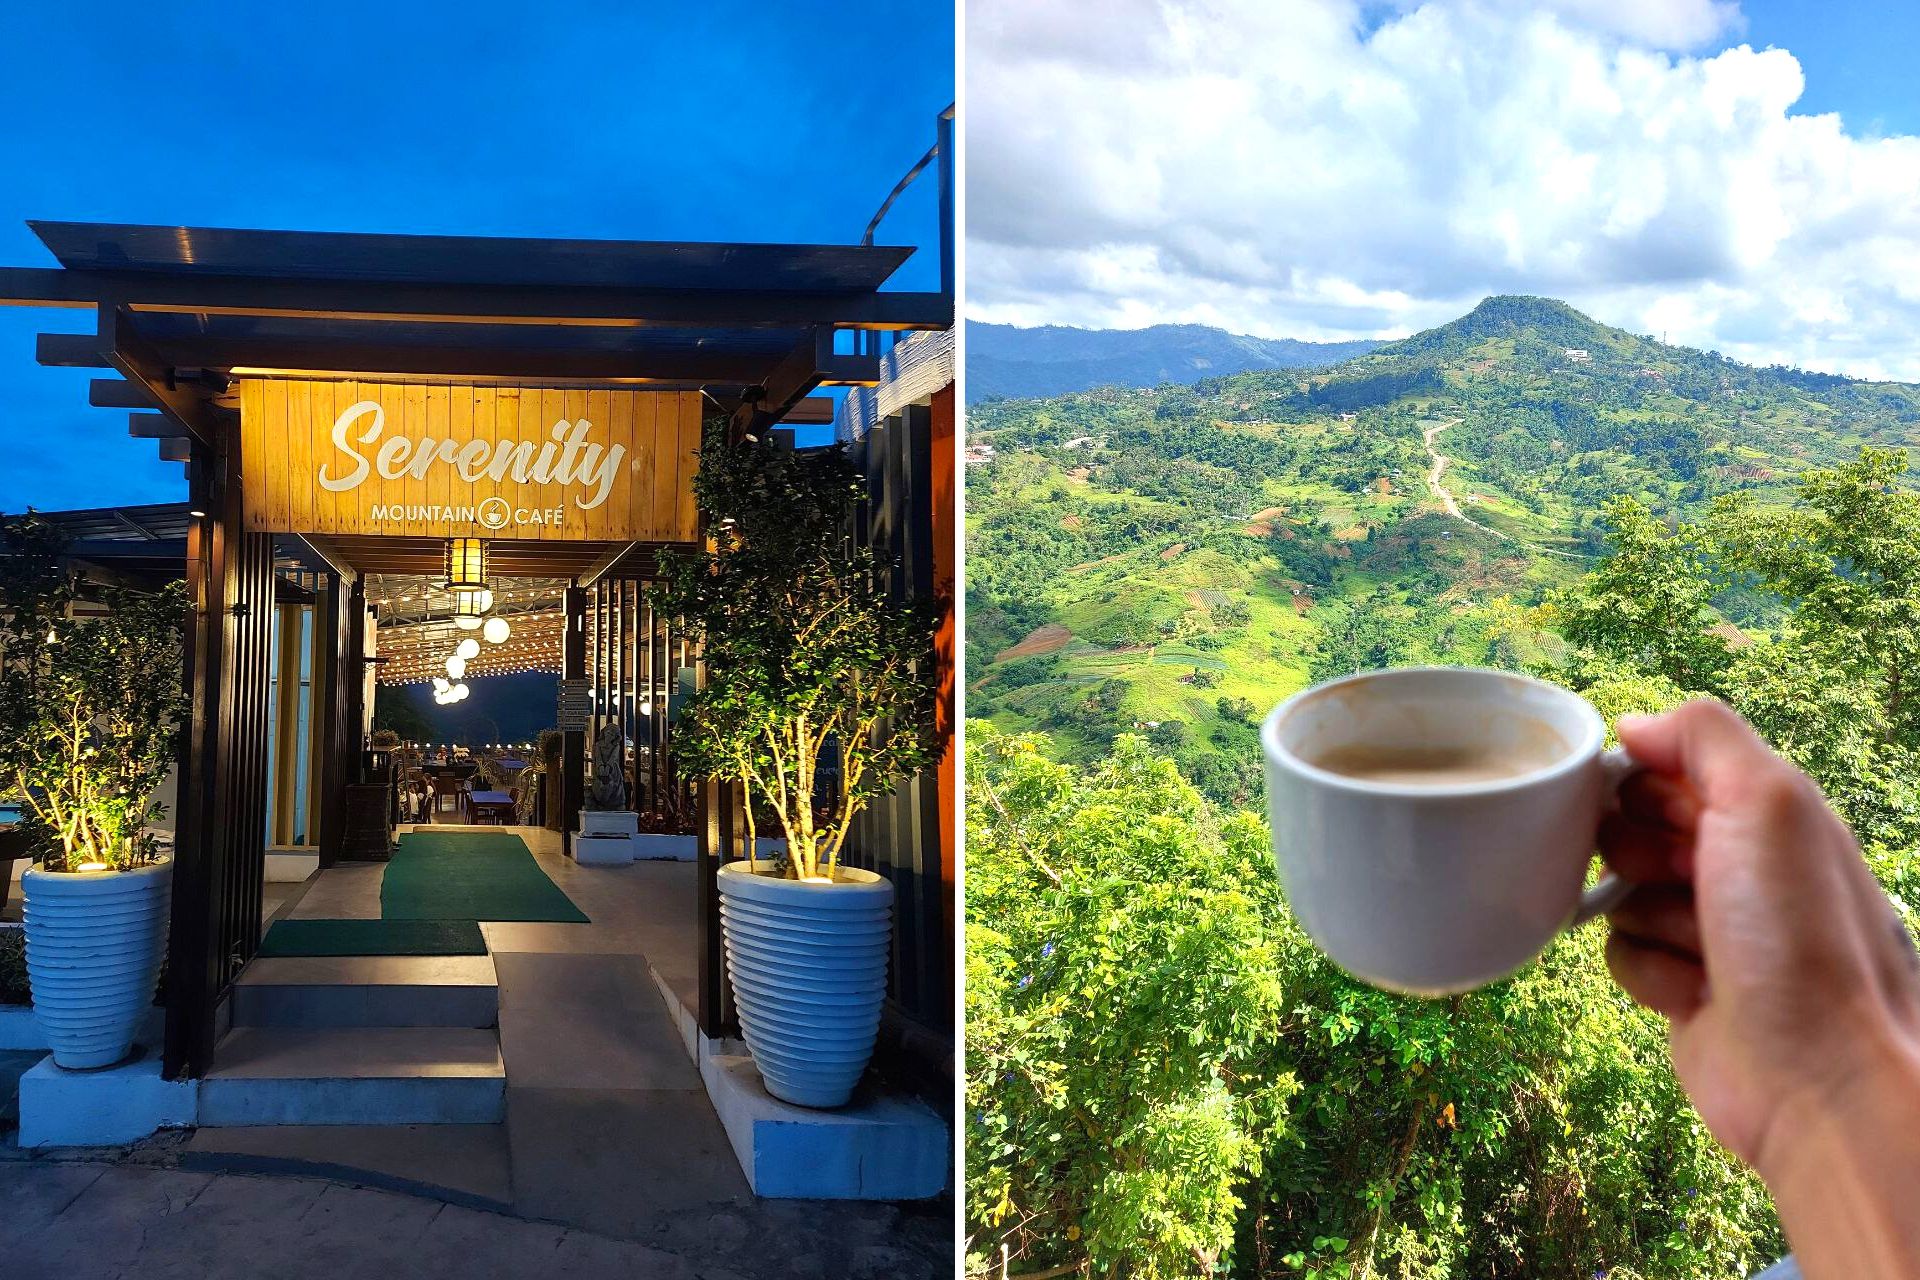 Serenity Mountain Cafe is one of the best cafes in Busay, Cebu